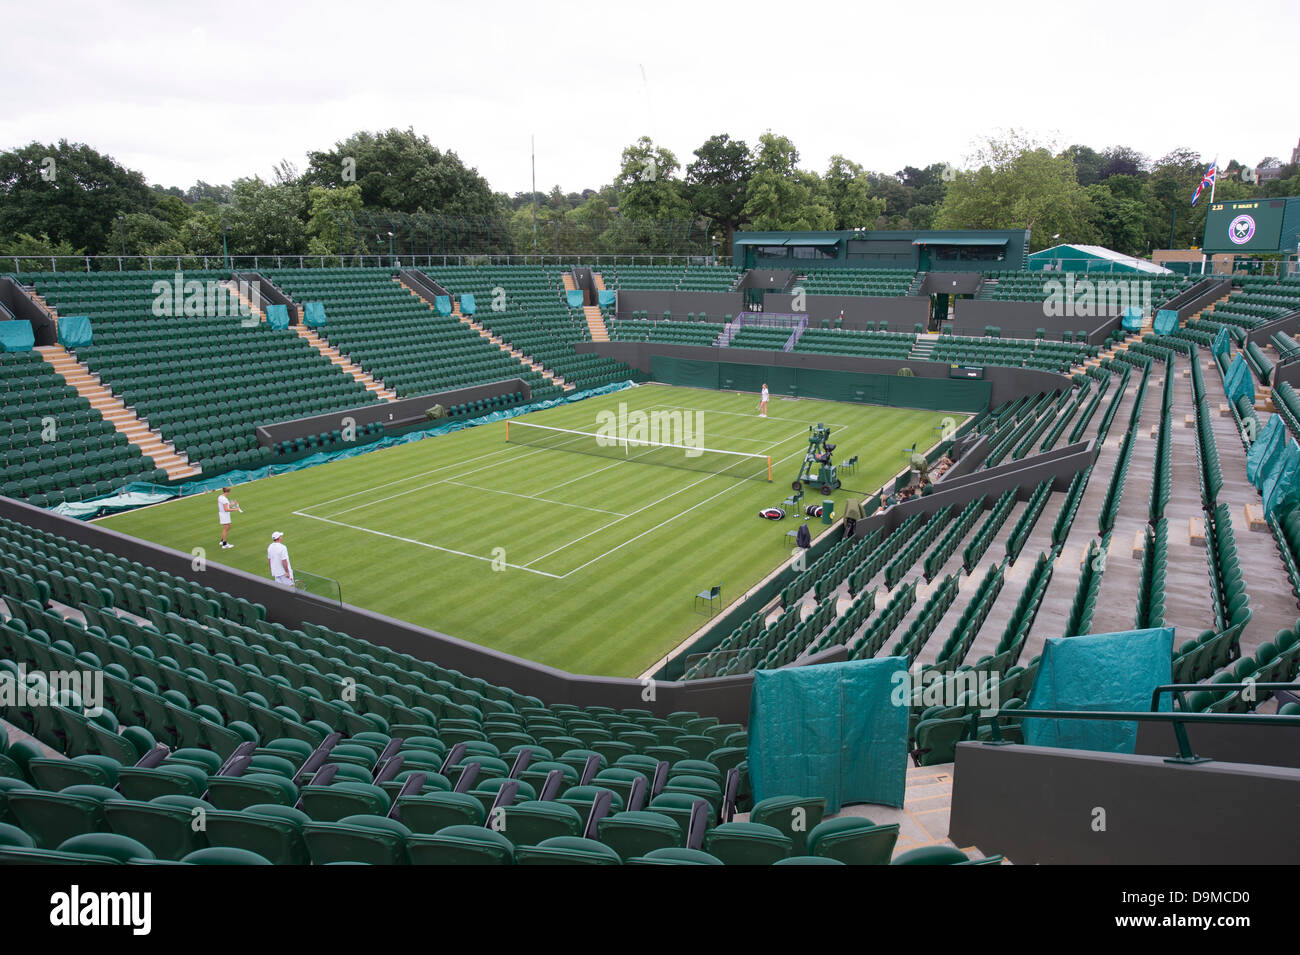 London, UK. 22nd June 2013. Practice and preparations take place ahead of The Wimbledon Tennis Championships 2013 held at The All England Lawn Tennis and Croquet Club.  General View (GV). No 2 Court. Credit:  Duncan Grove/Alamy Live News Stock Photo